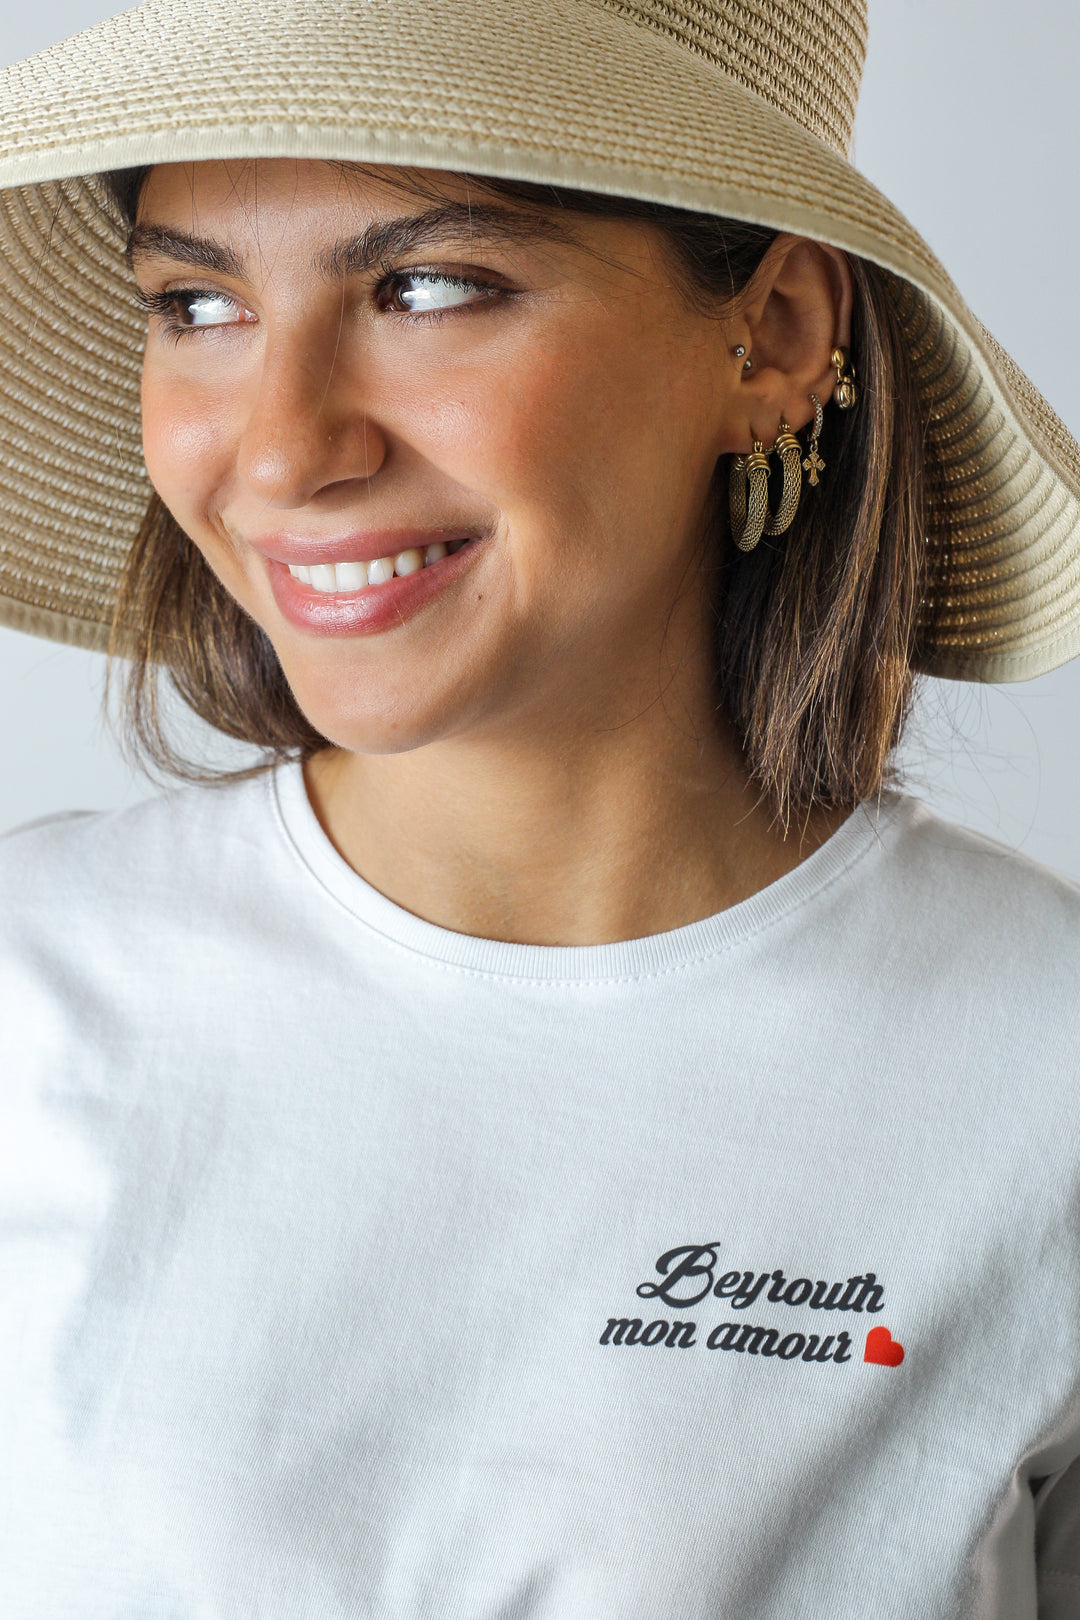 Young adult female wearing a white T-Shirt with Beyrouth mon amour written in French and printed in silkscreen along with a beige hat.